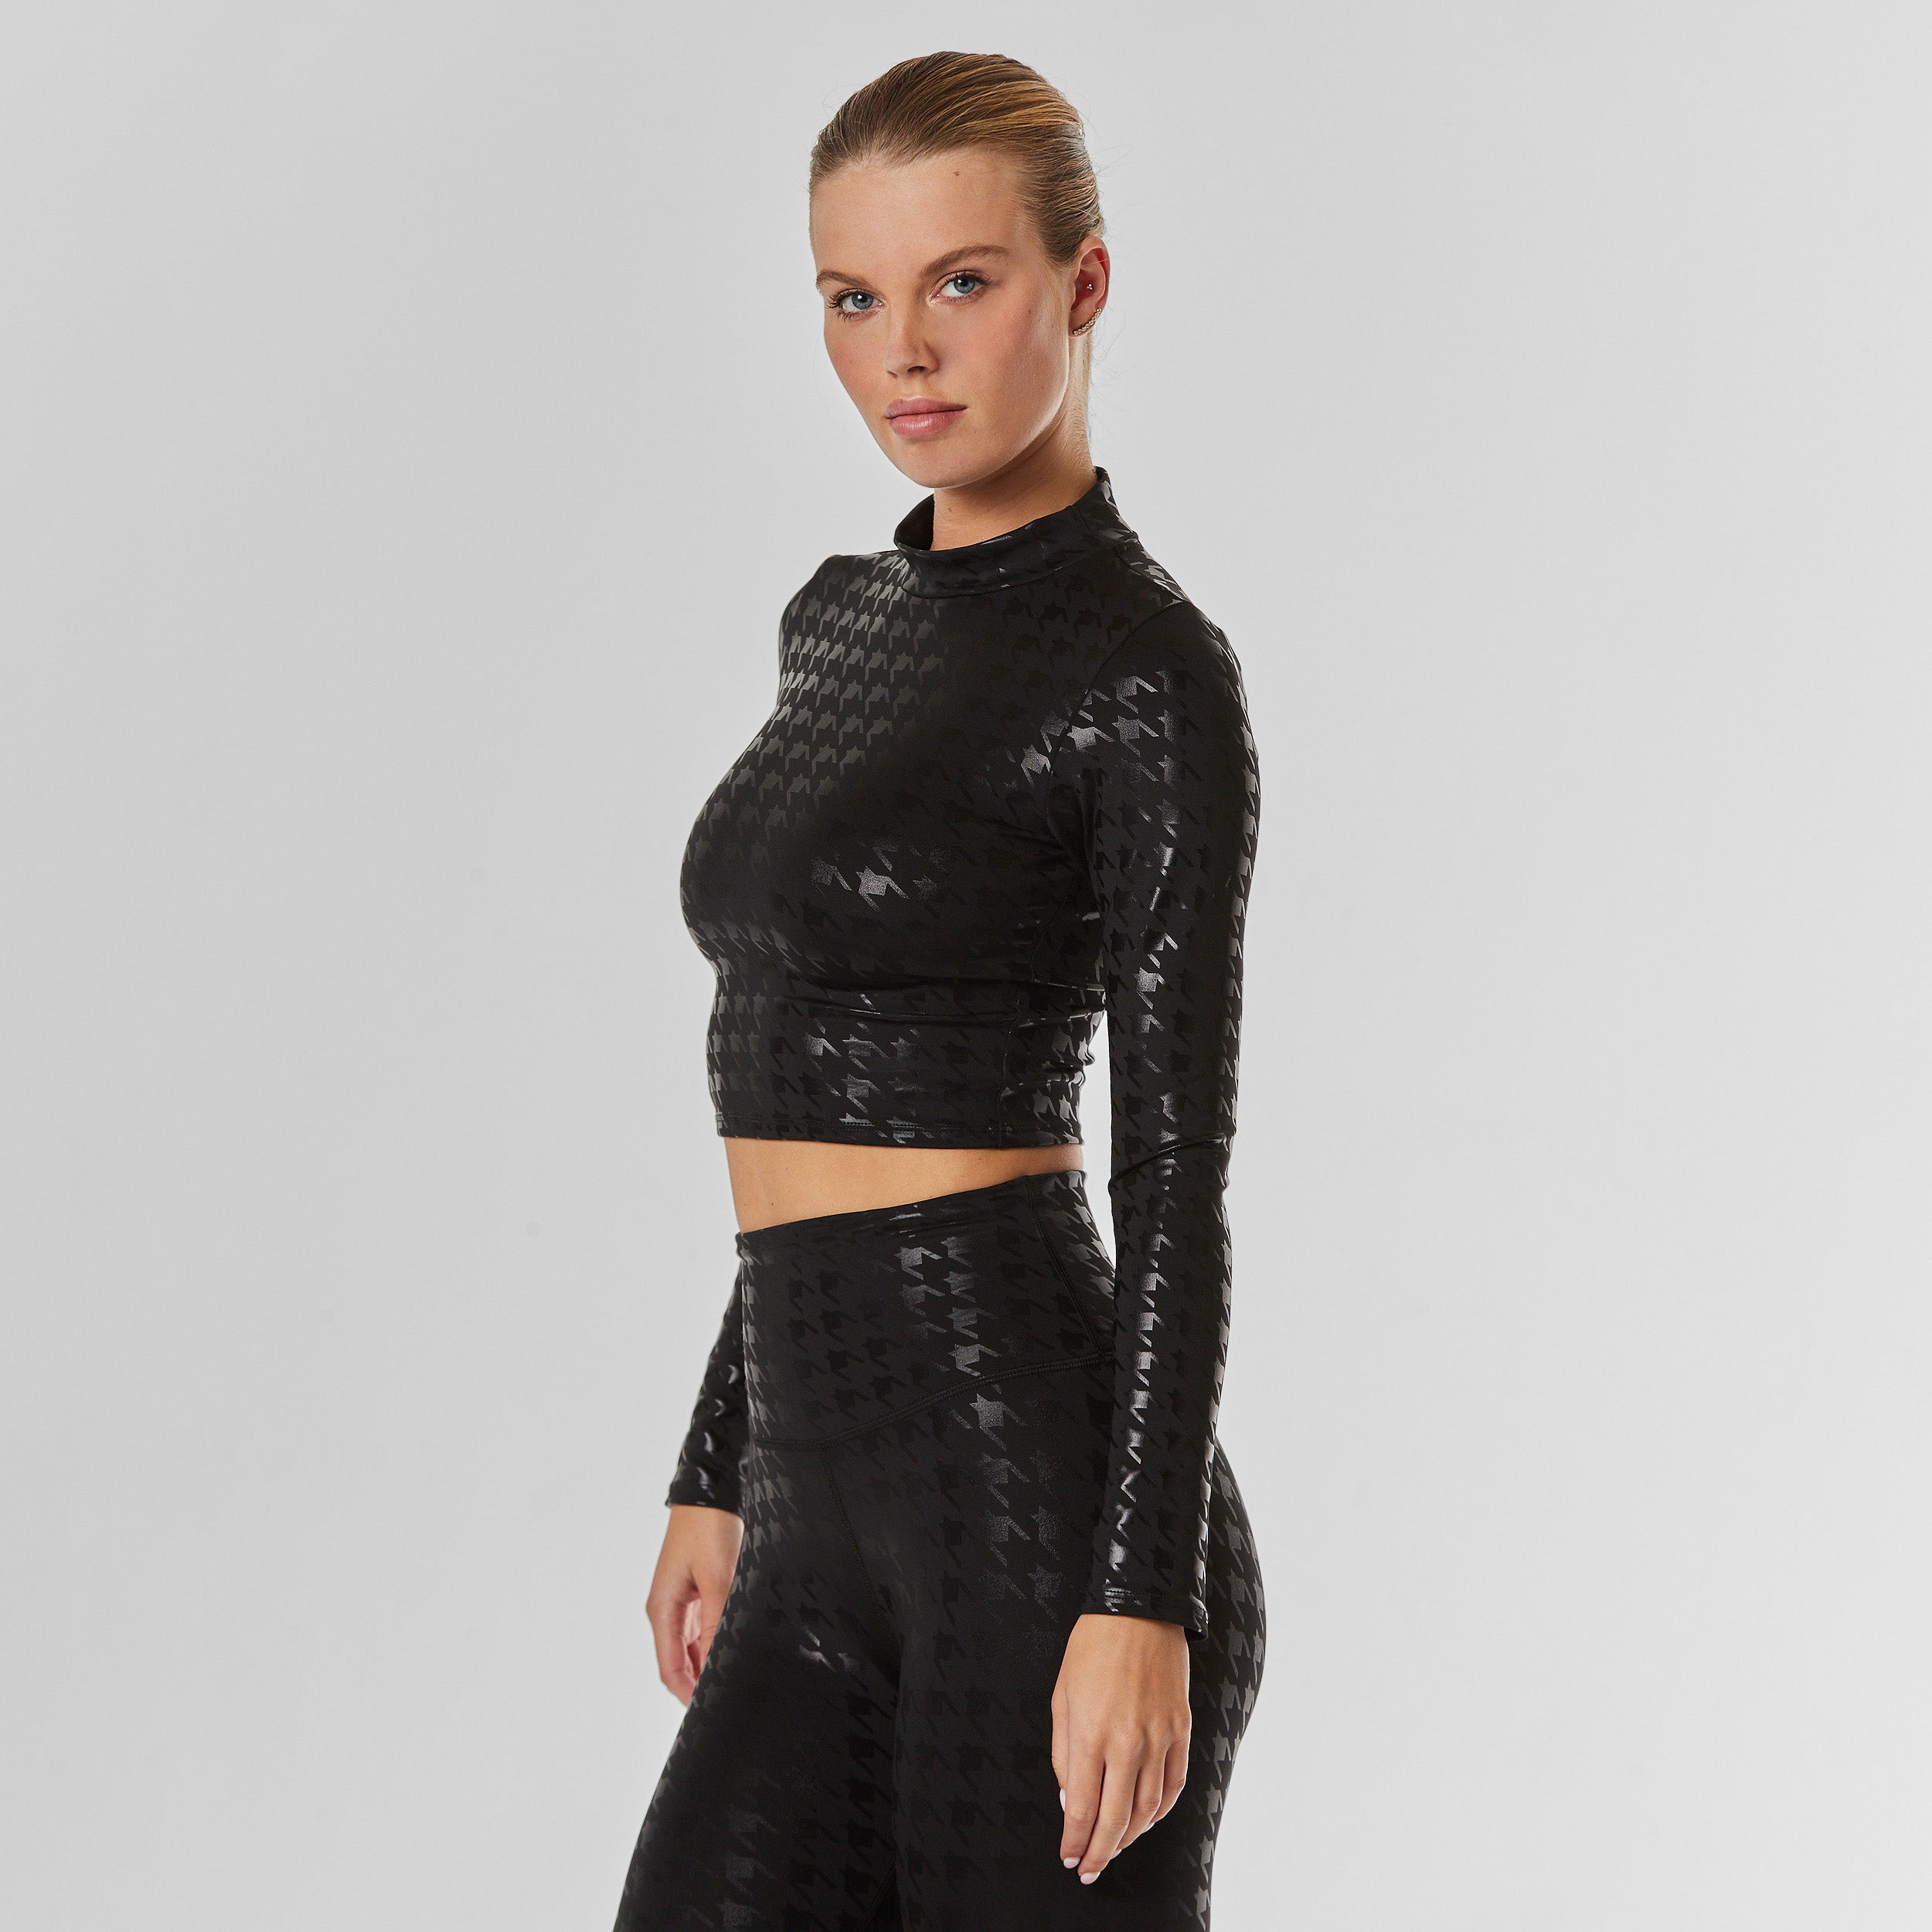 Side view of black on black houndstooth Long Sleeve top